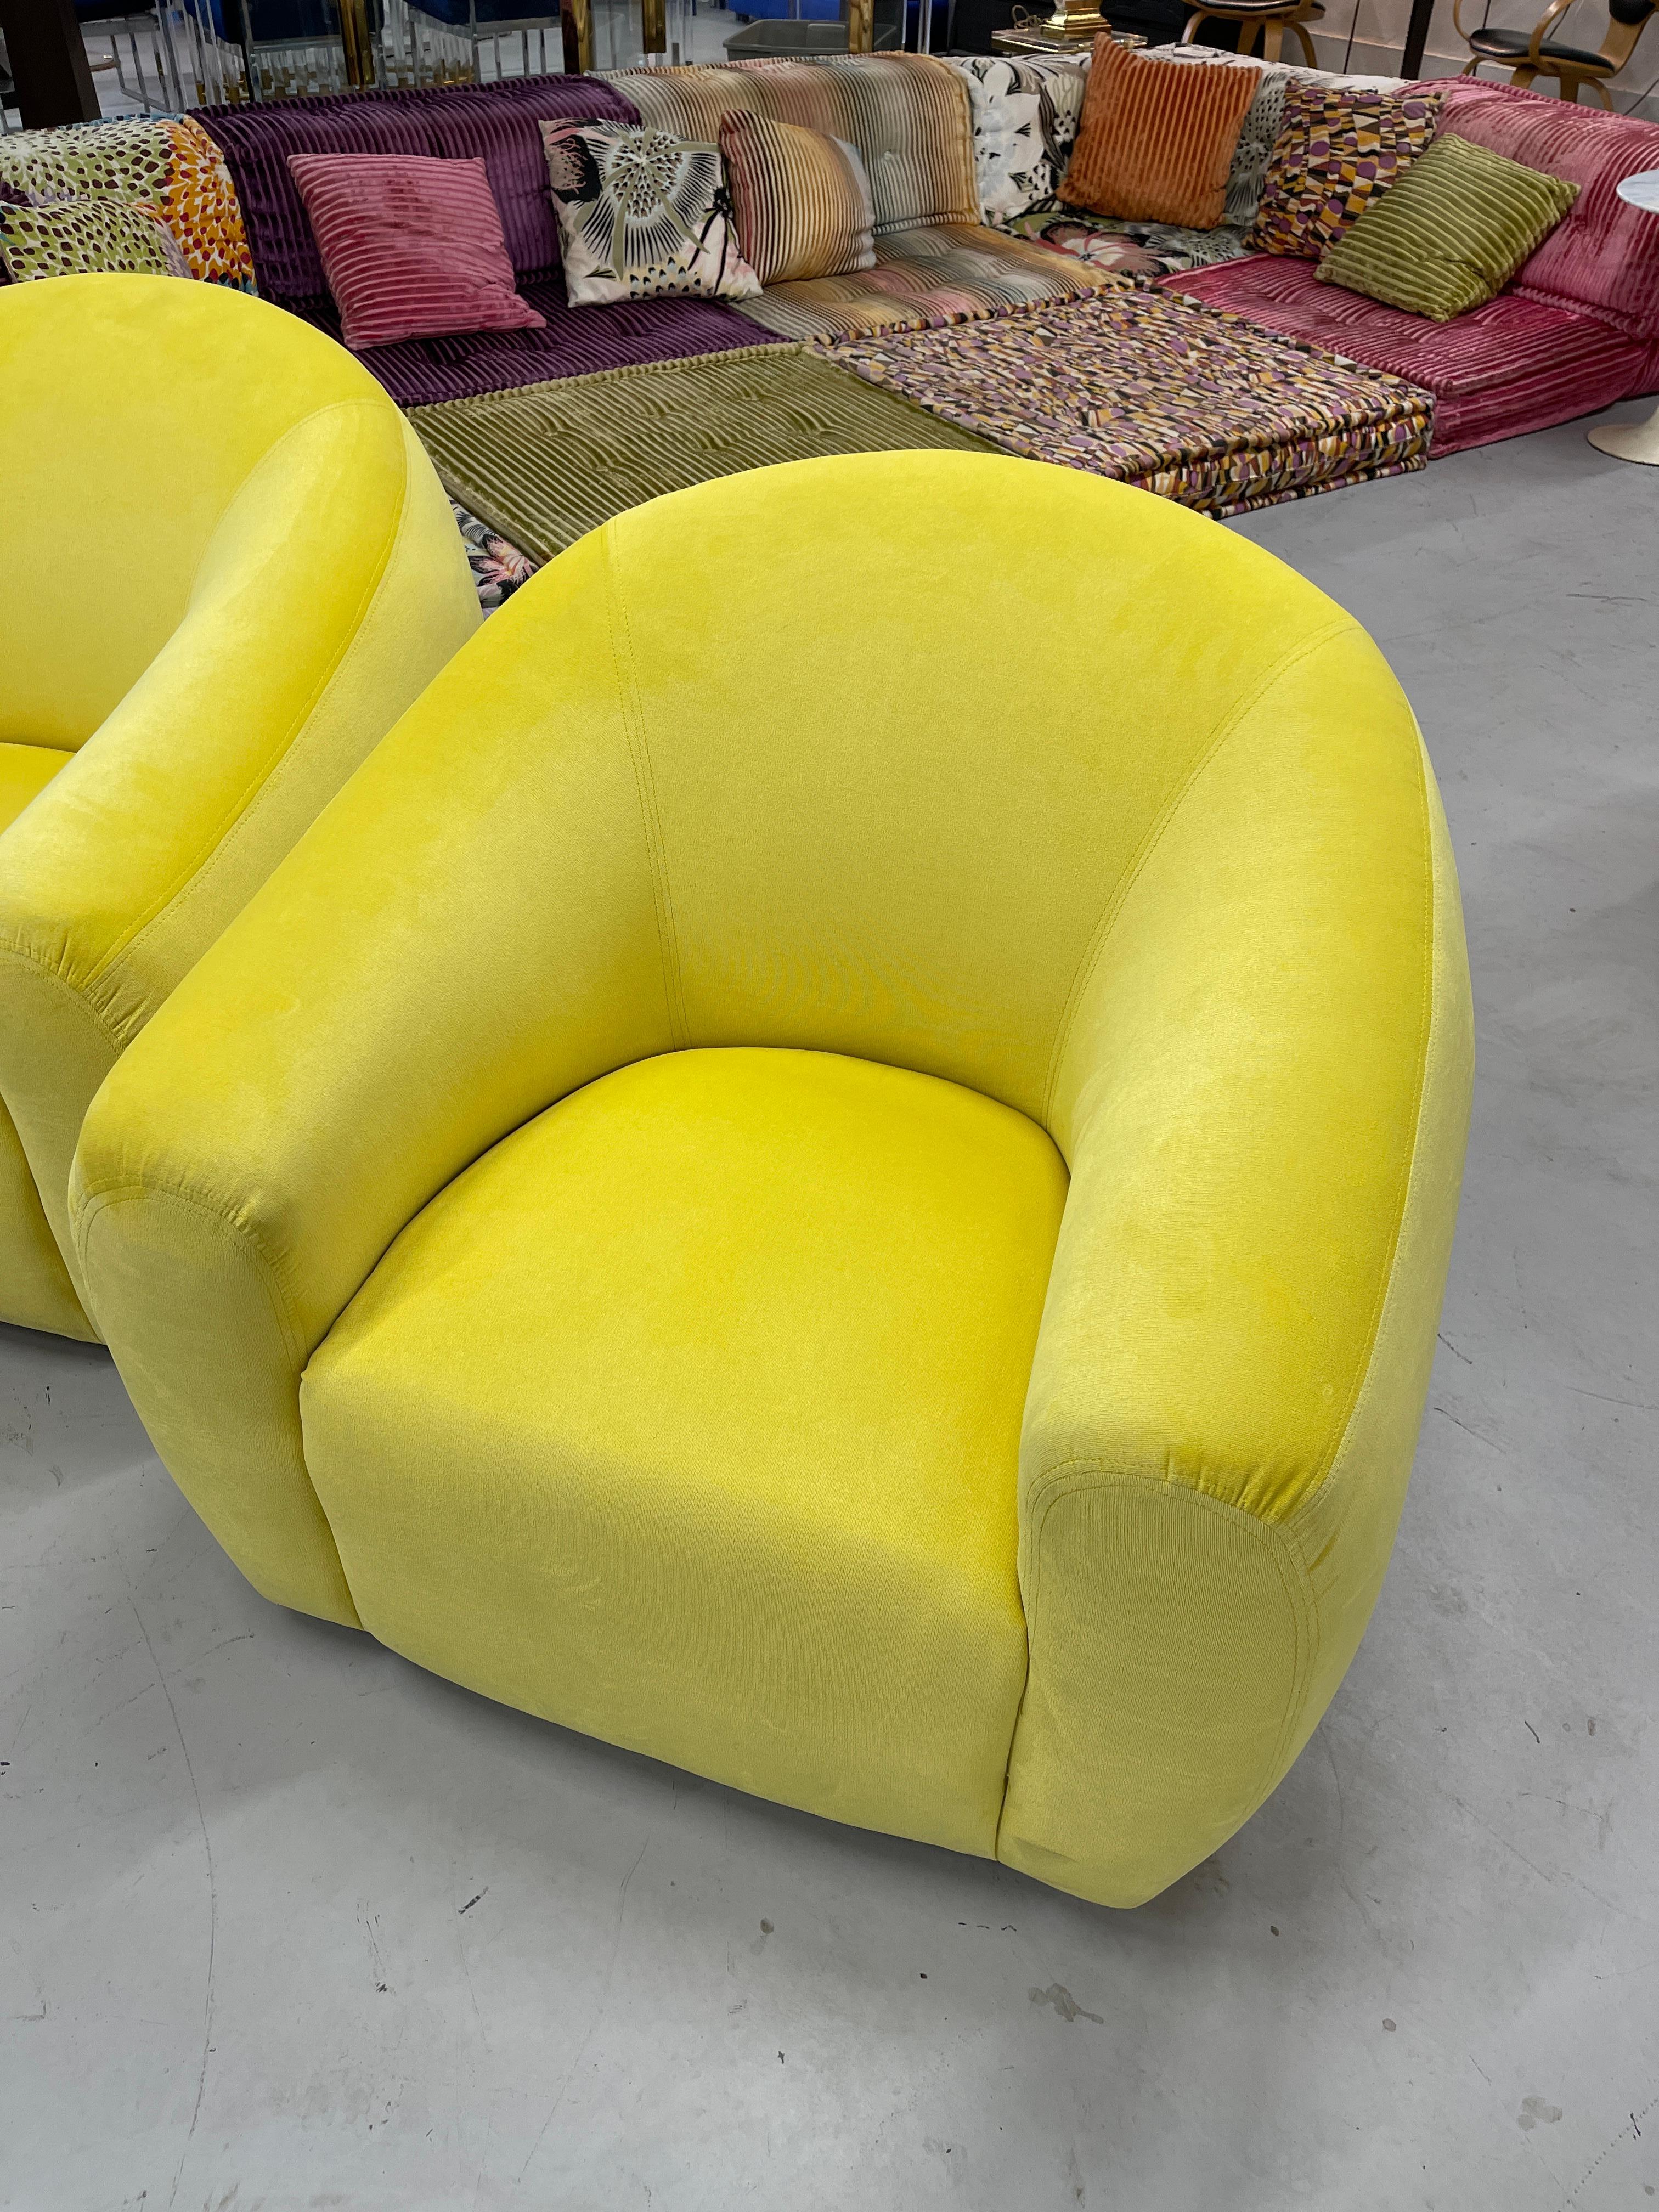 A Rudin Swivel Chairs in Limon Kravet Fabric 3